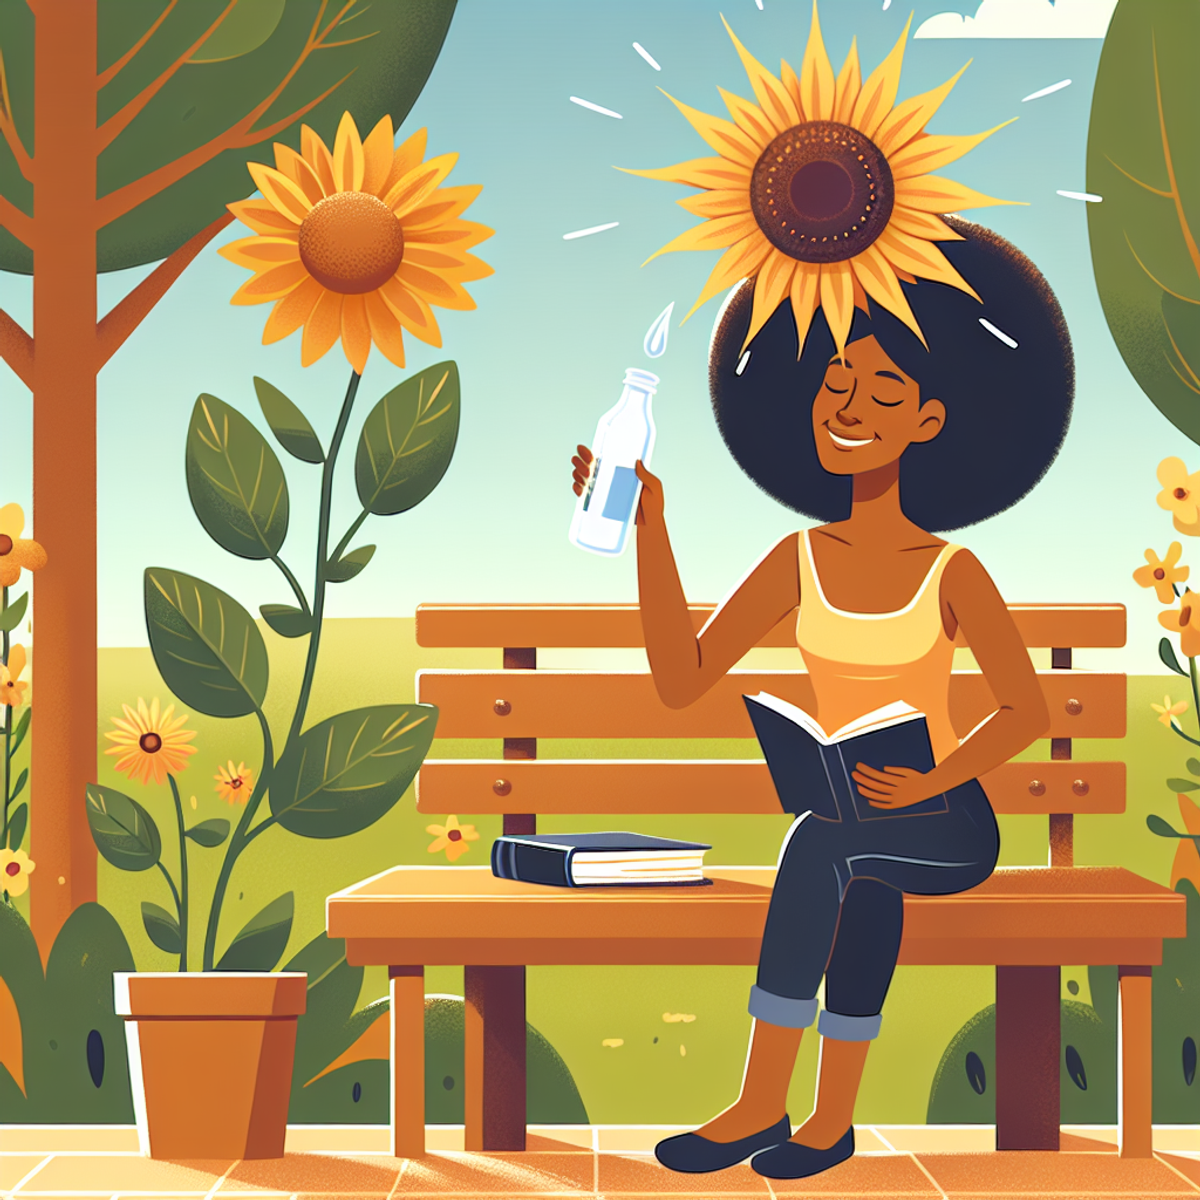 A woman sitting on a park bench with a book and water bottle, sunflower nearby.